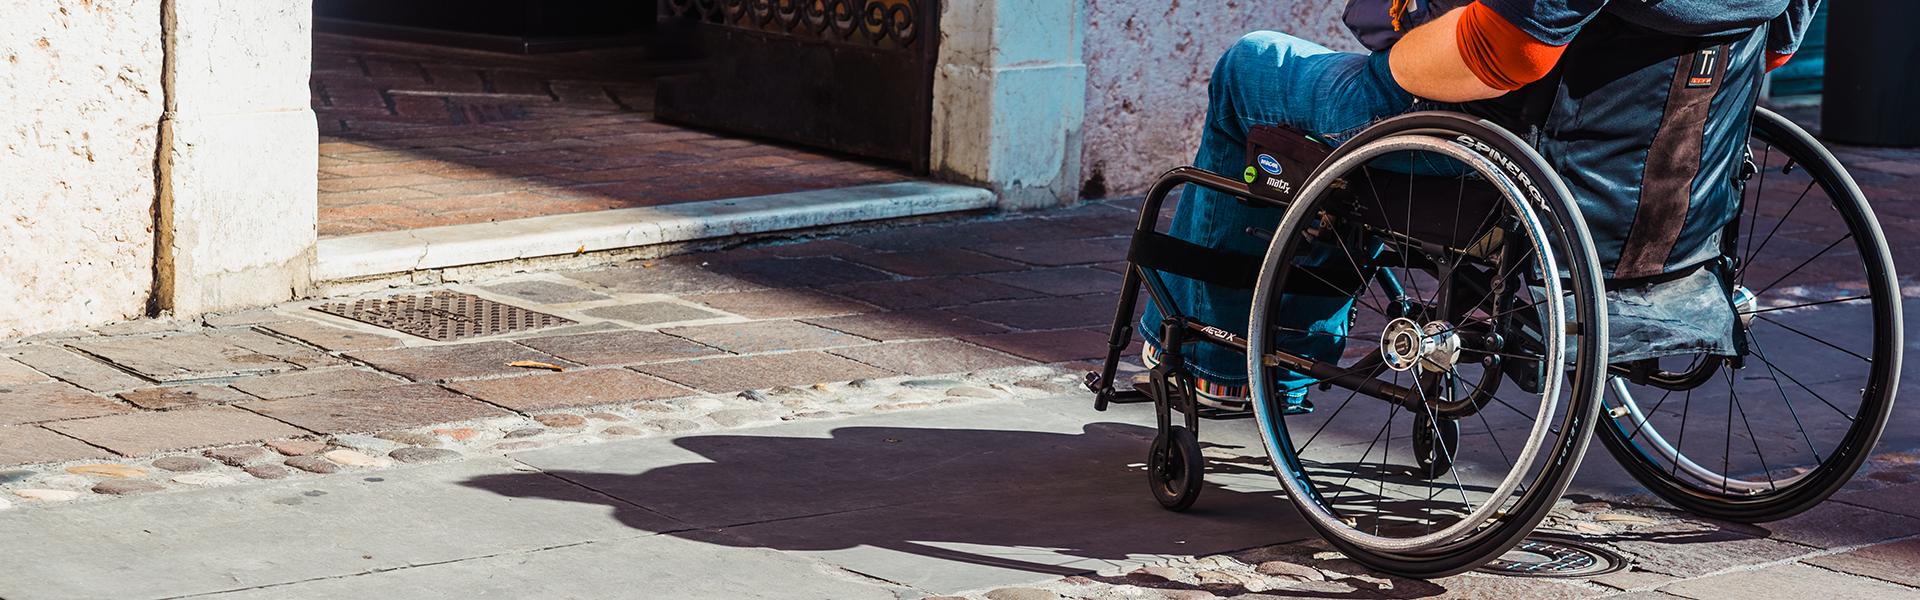 a person in a wheel chair looking into an inaccessible location 